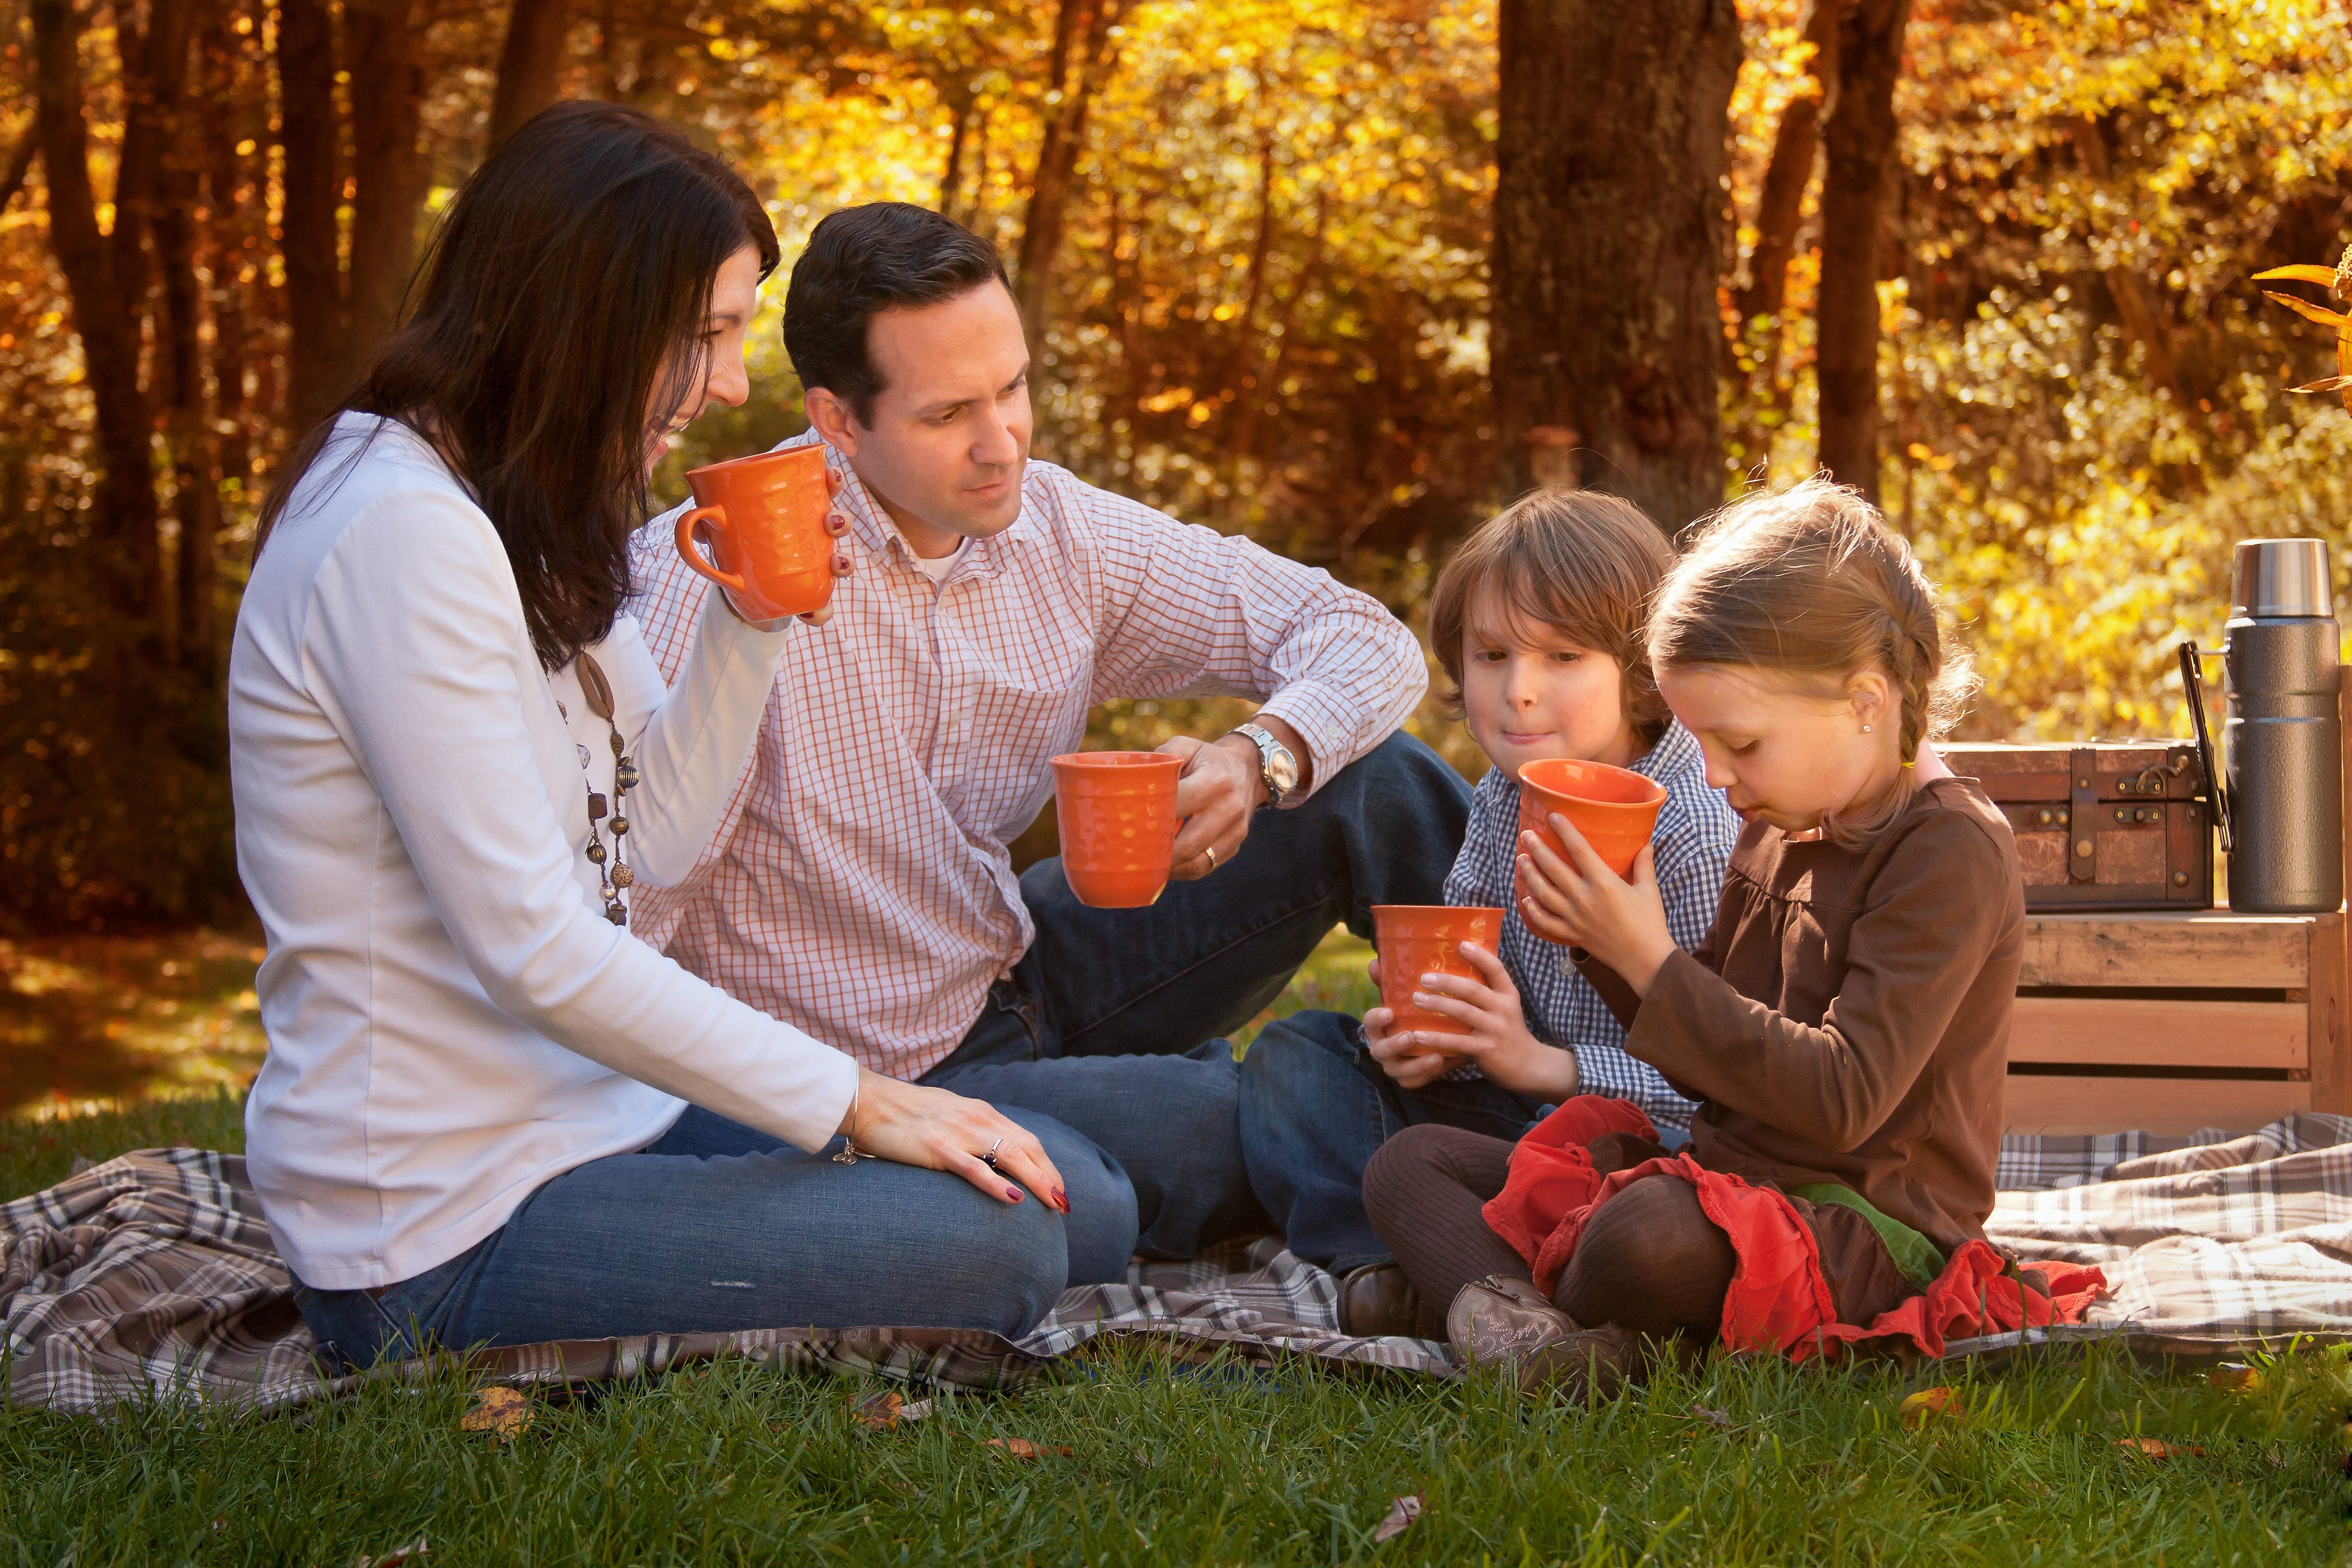 Mom, Dad and two kids enjoying hot cocoa in the fall sitting on a blanket with orange mugs